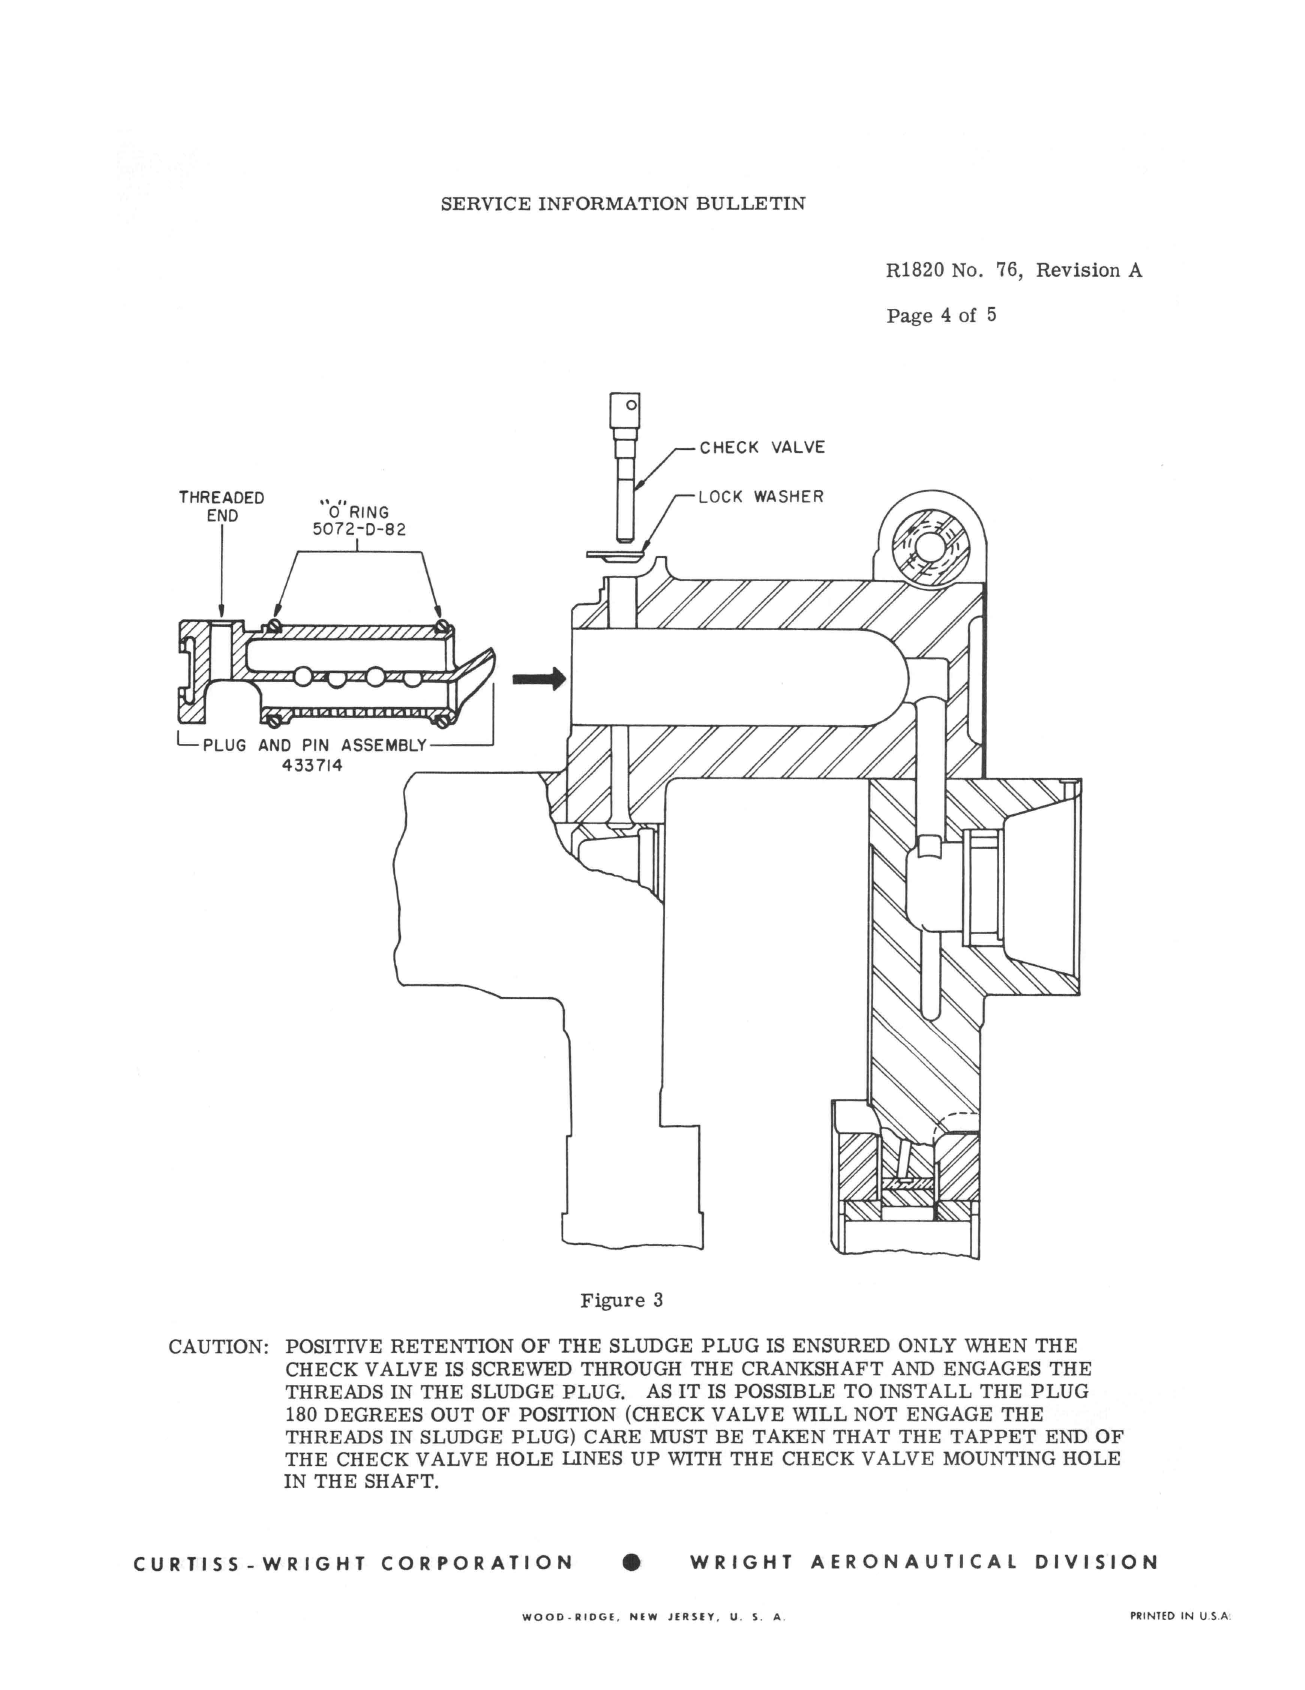 Sample page 4 from AirCorps Library document: Provision for Crankshaft Crankpin Sludge Retaining Plug & Pin Assembly